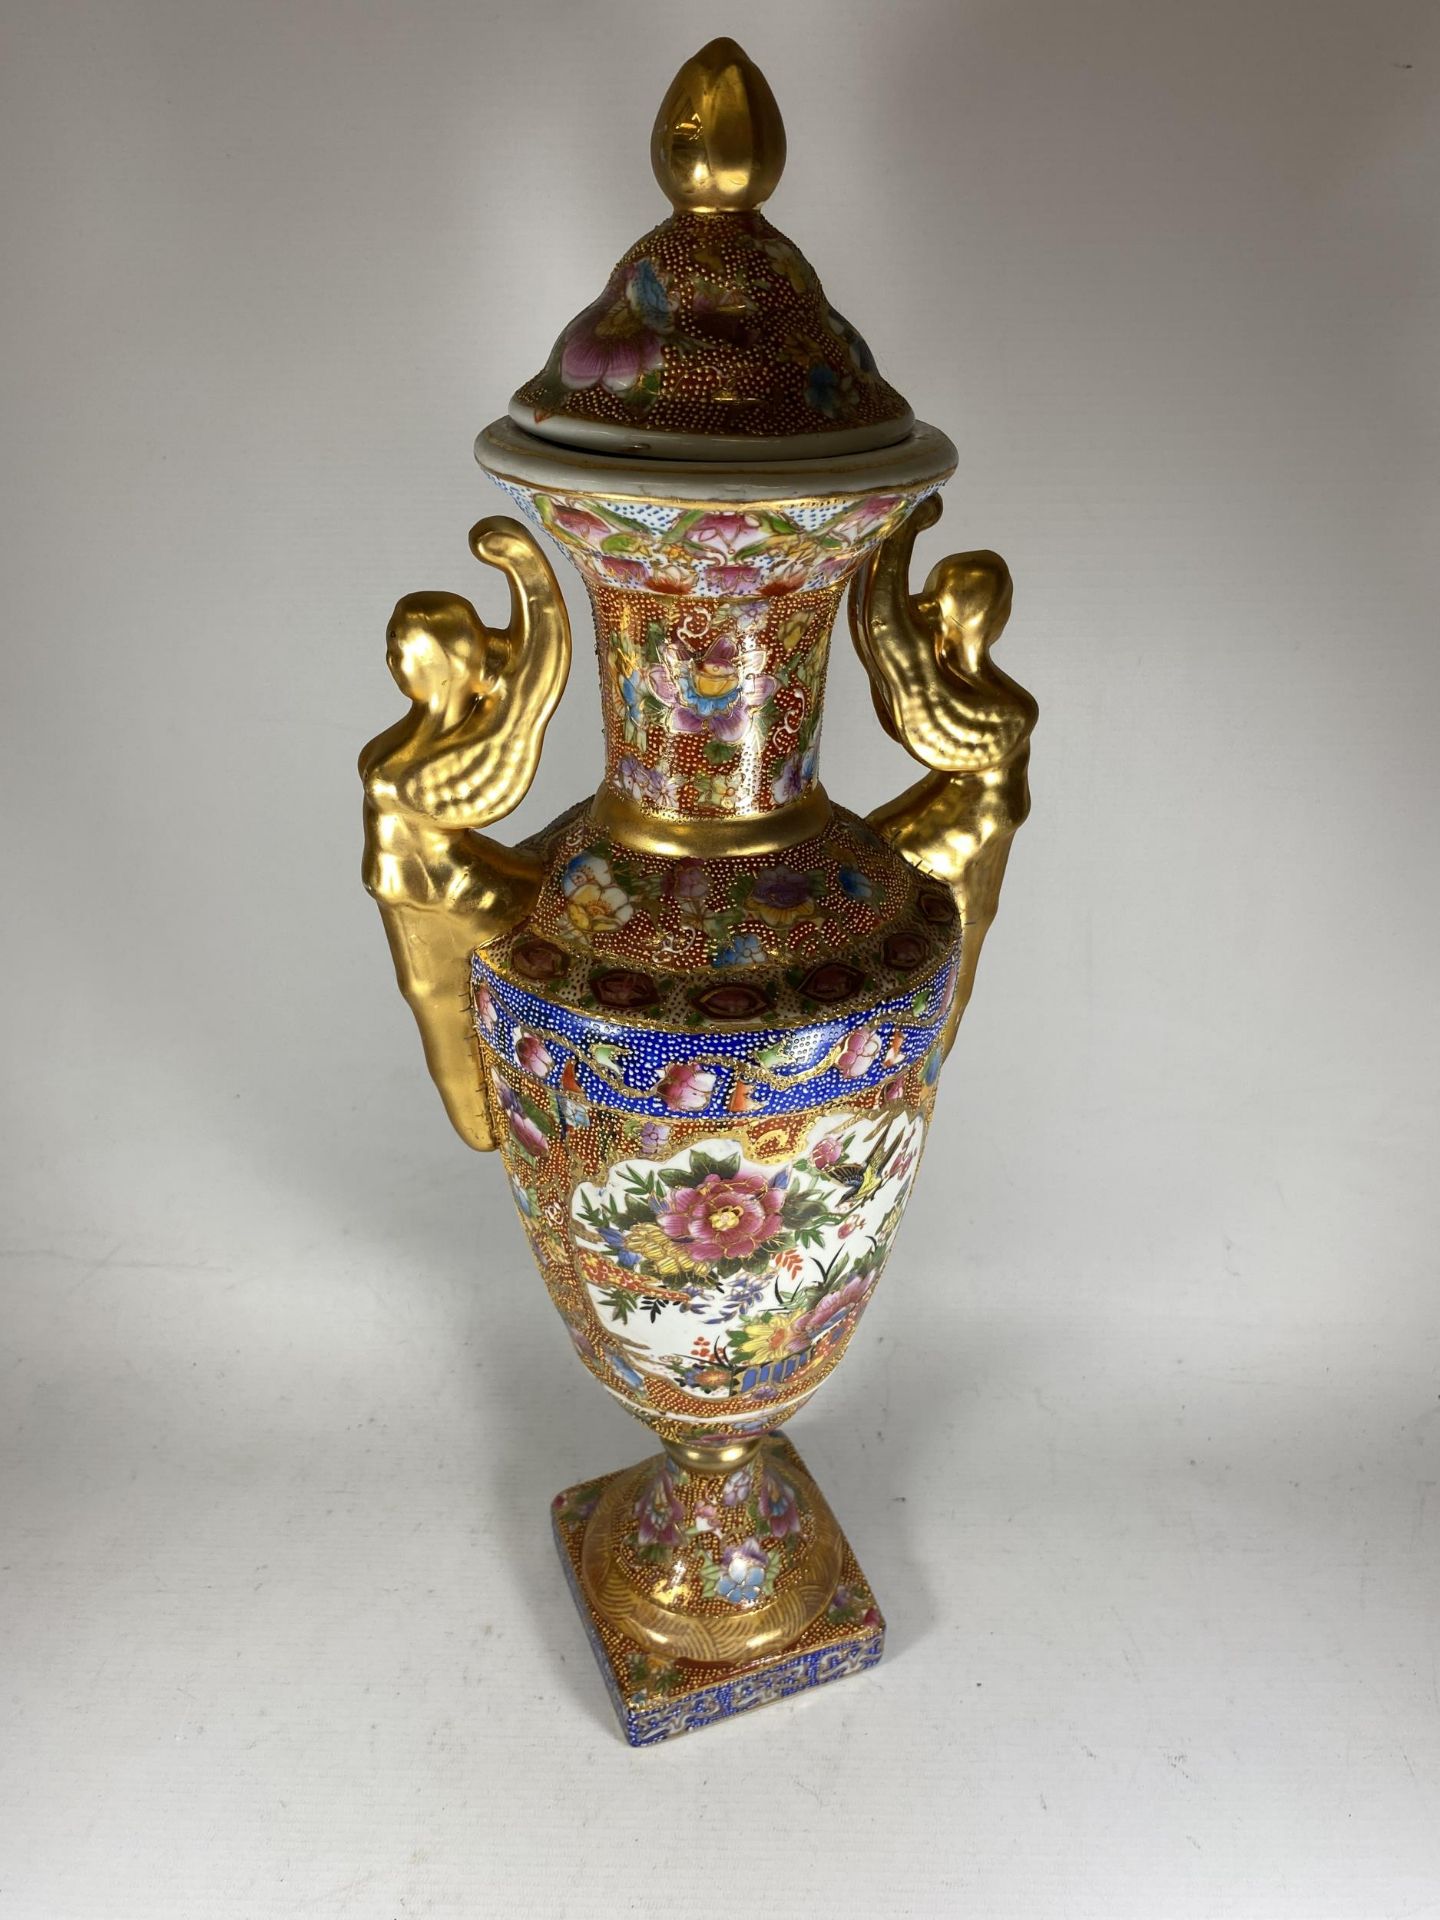 A LARGE DECORATIVE JAPANESE LIDDED TWIN HANDLED VASE, HEIGHT 56CM - Image 3 of 3